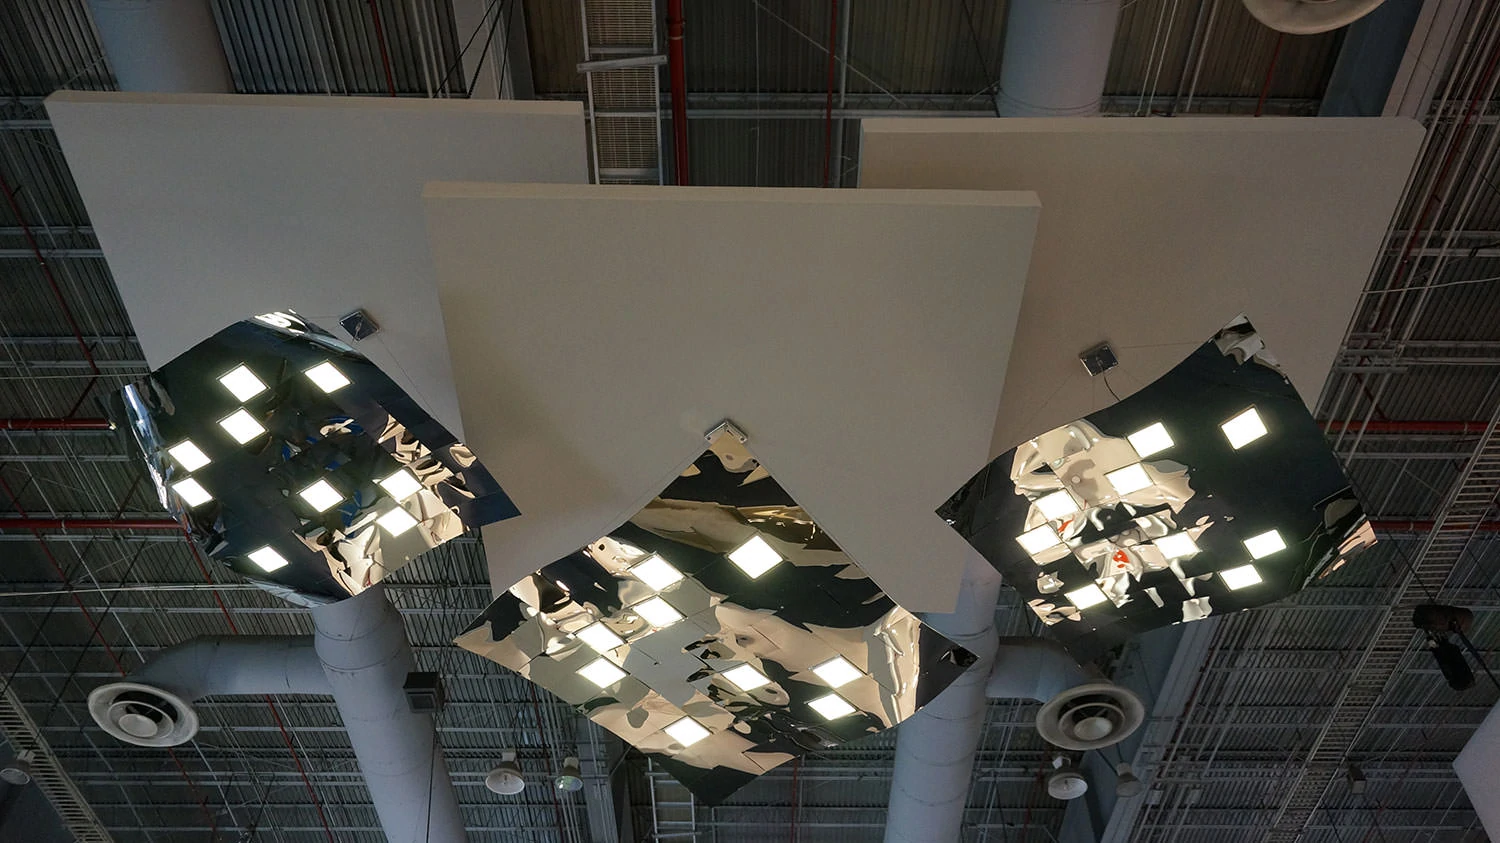 Three pendant OLED luminaires Pixelate hanging from a ceiling